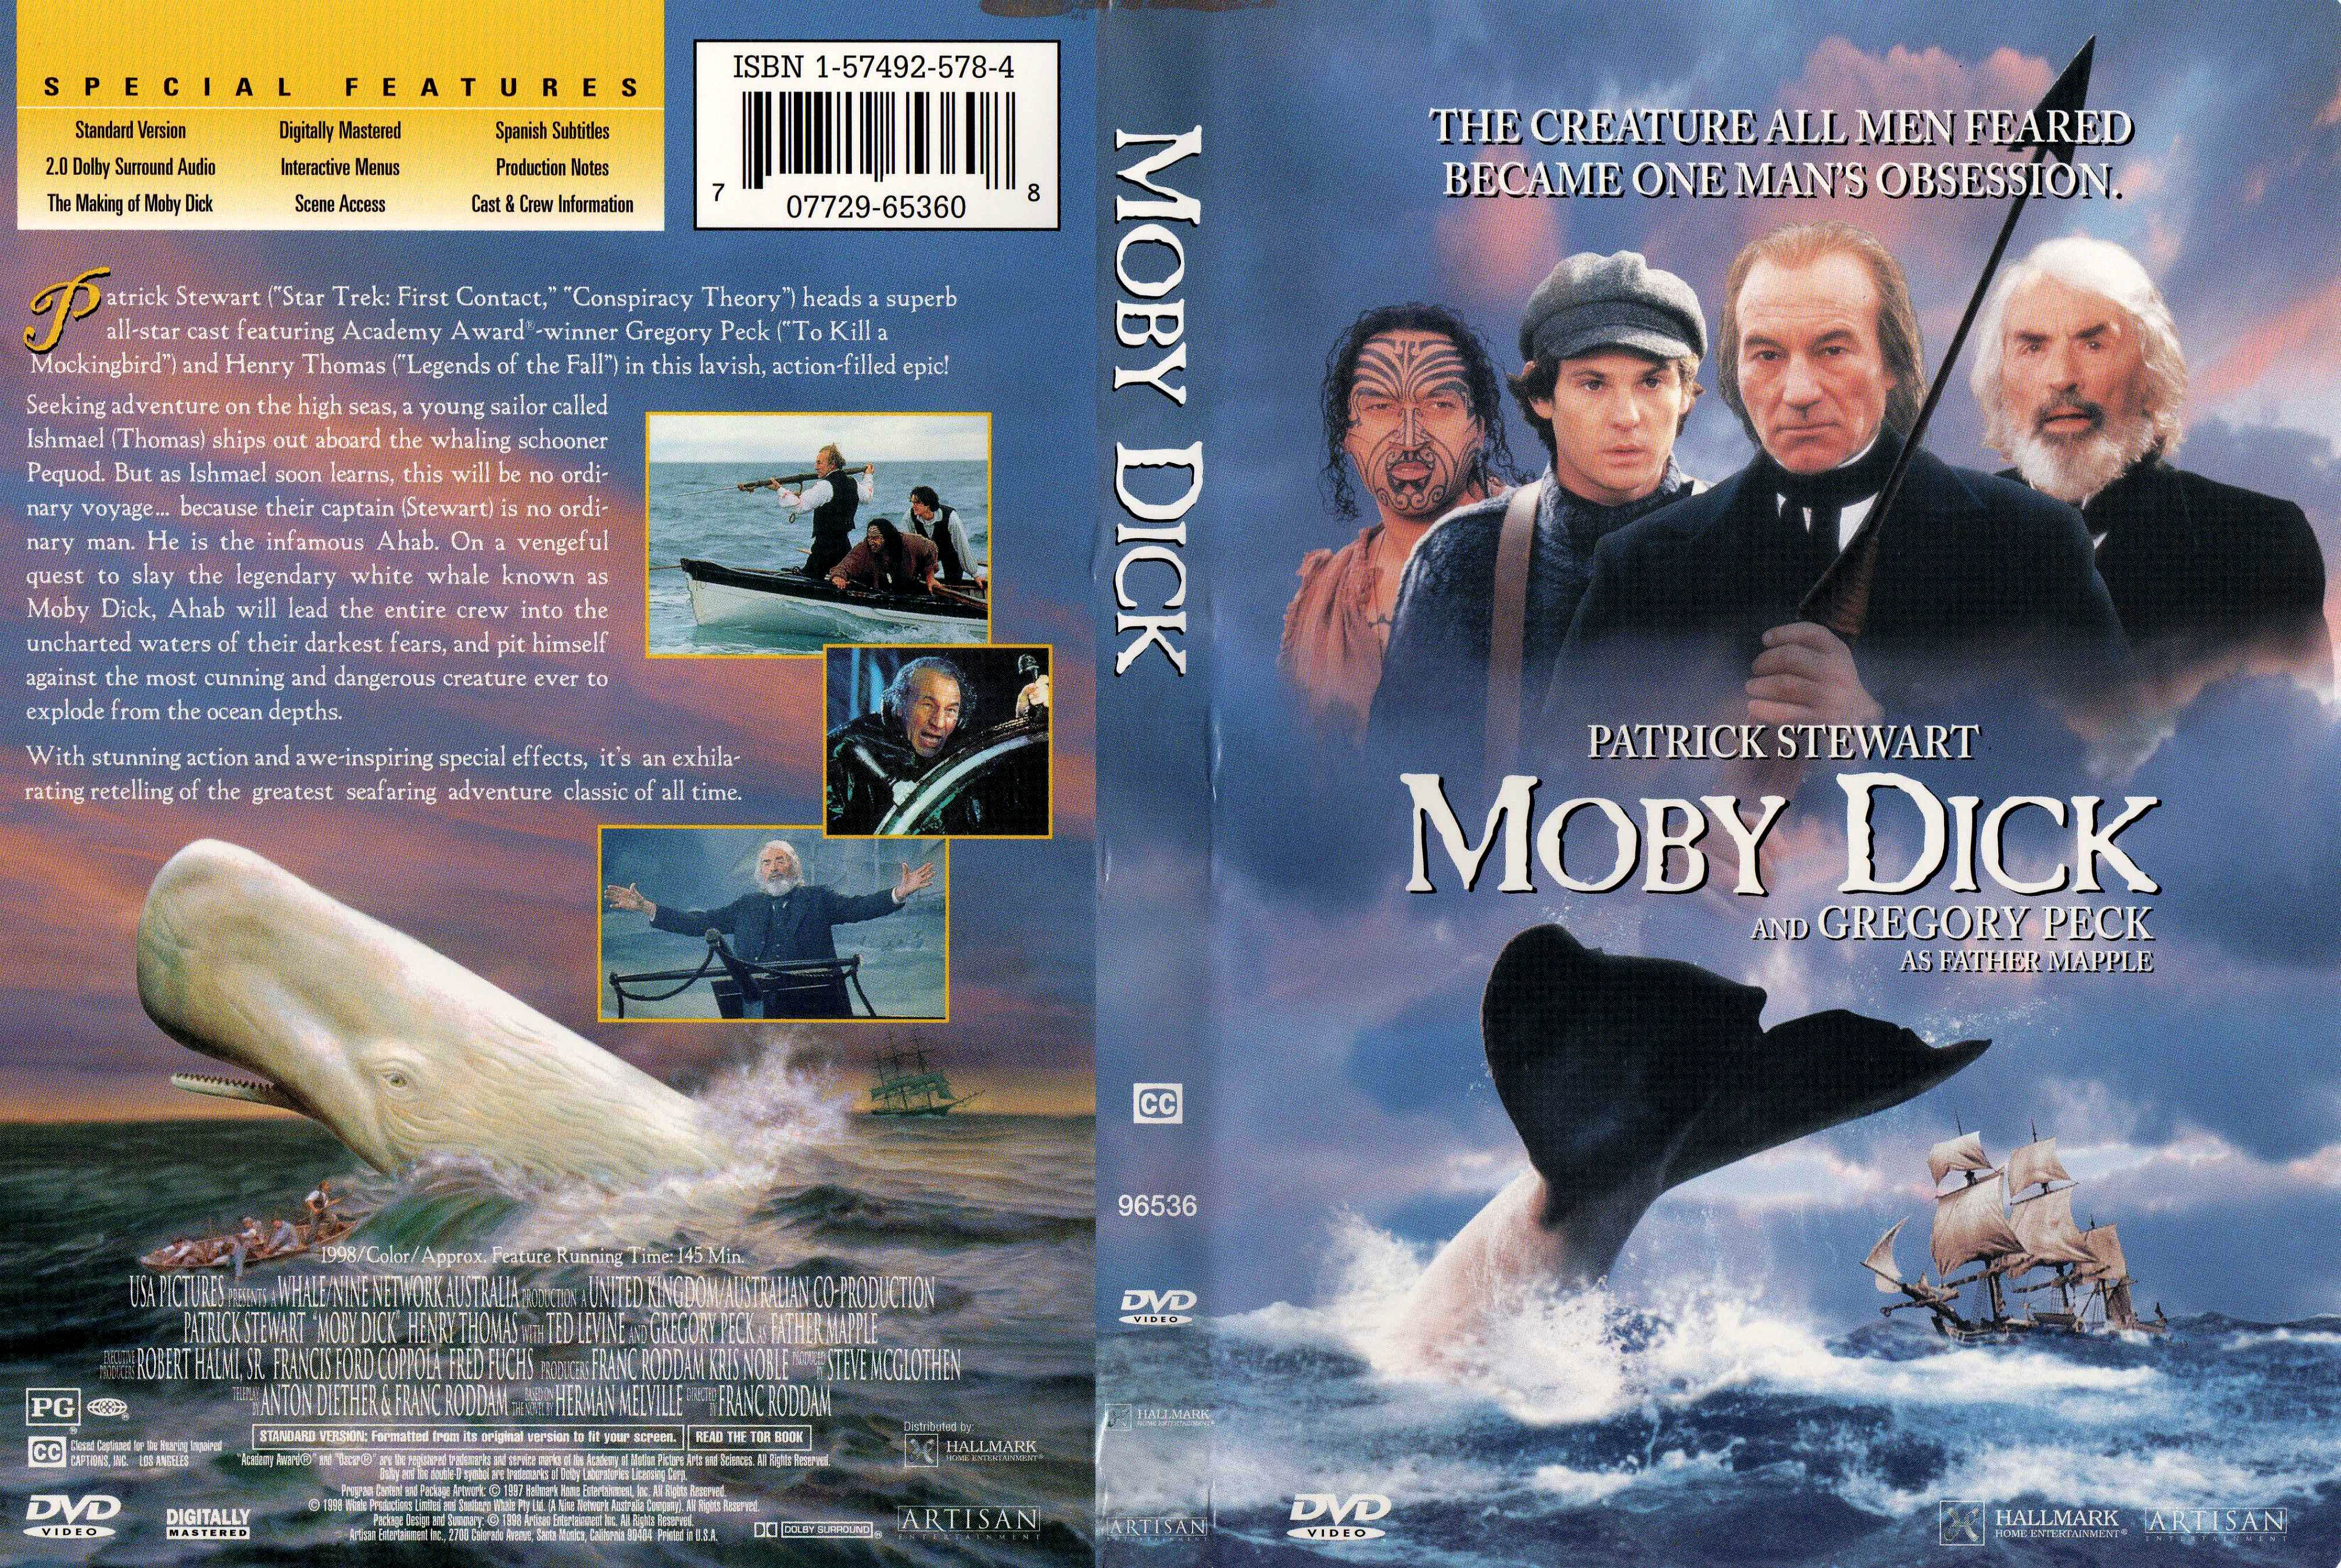 Moby dick movie produced by